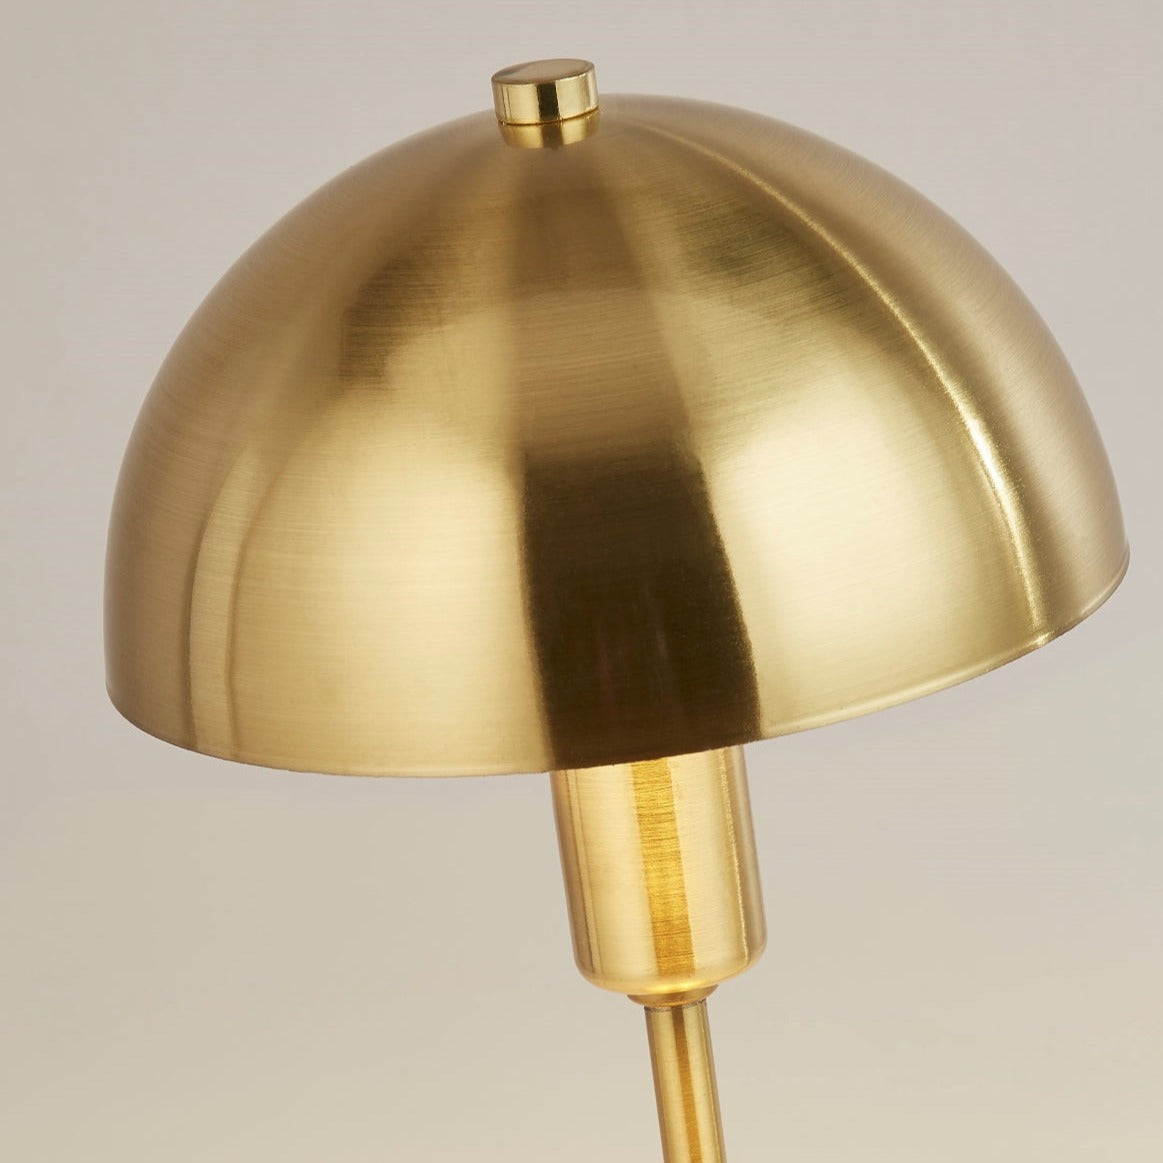 Our Nellie table lamp is a strong visual addition to your space with its distinctive dome-shaped shade and metal frame. Thanks to its brushed gold brass metal finish, it will suit both modern and traditional homes and commercial properties. Light reflects off the shade to enhance a warm and inviting glow.